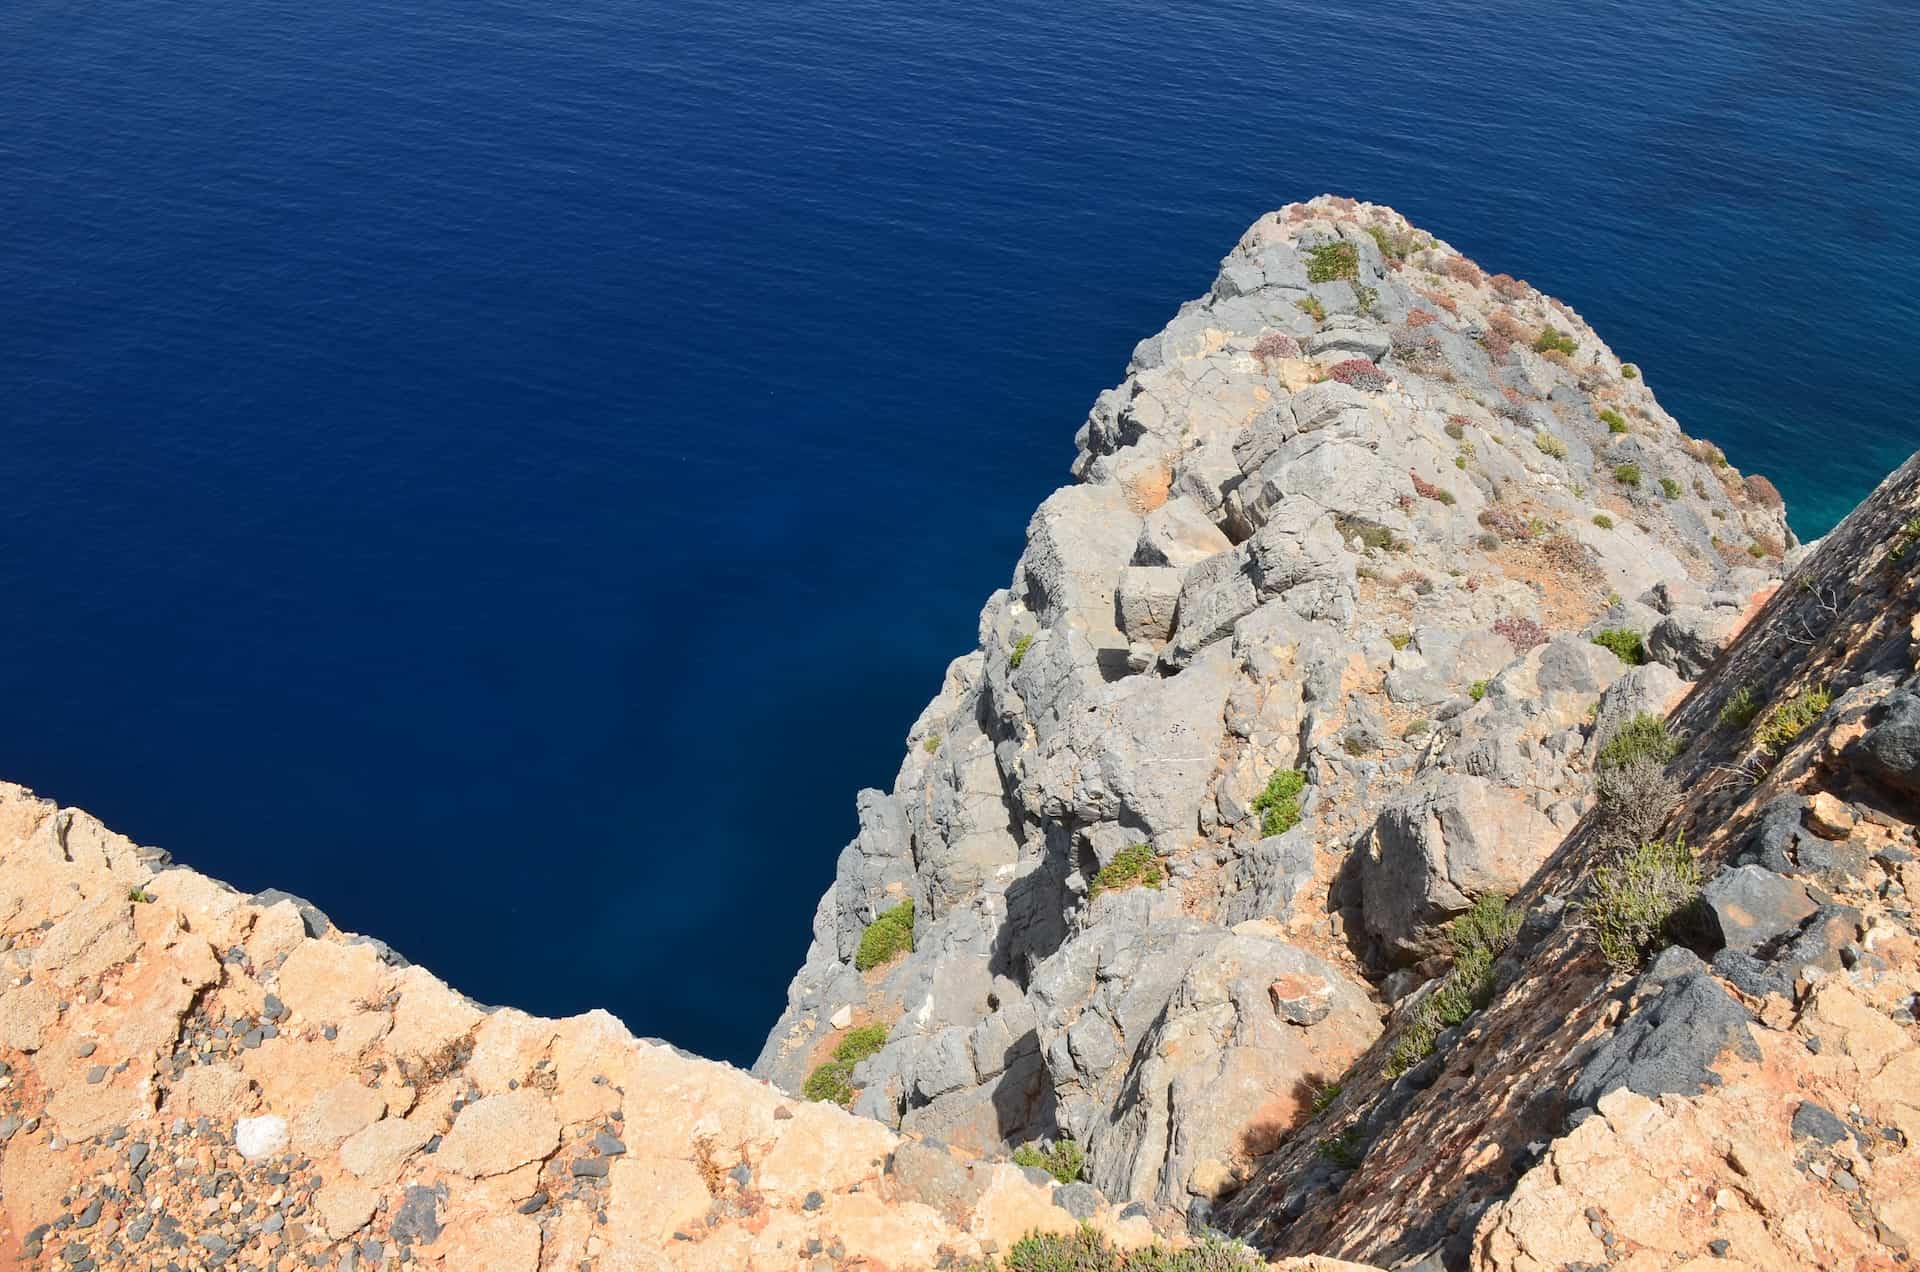 Steep drop down to the sea from the Venetian fortress on Gramvousa, Crete